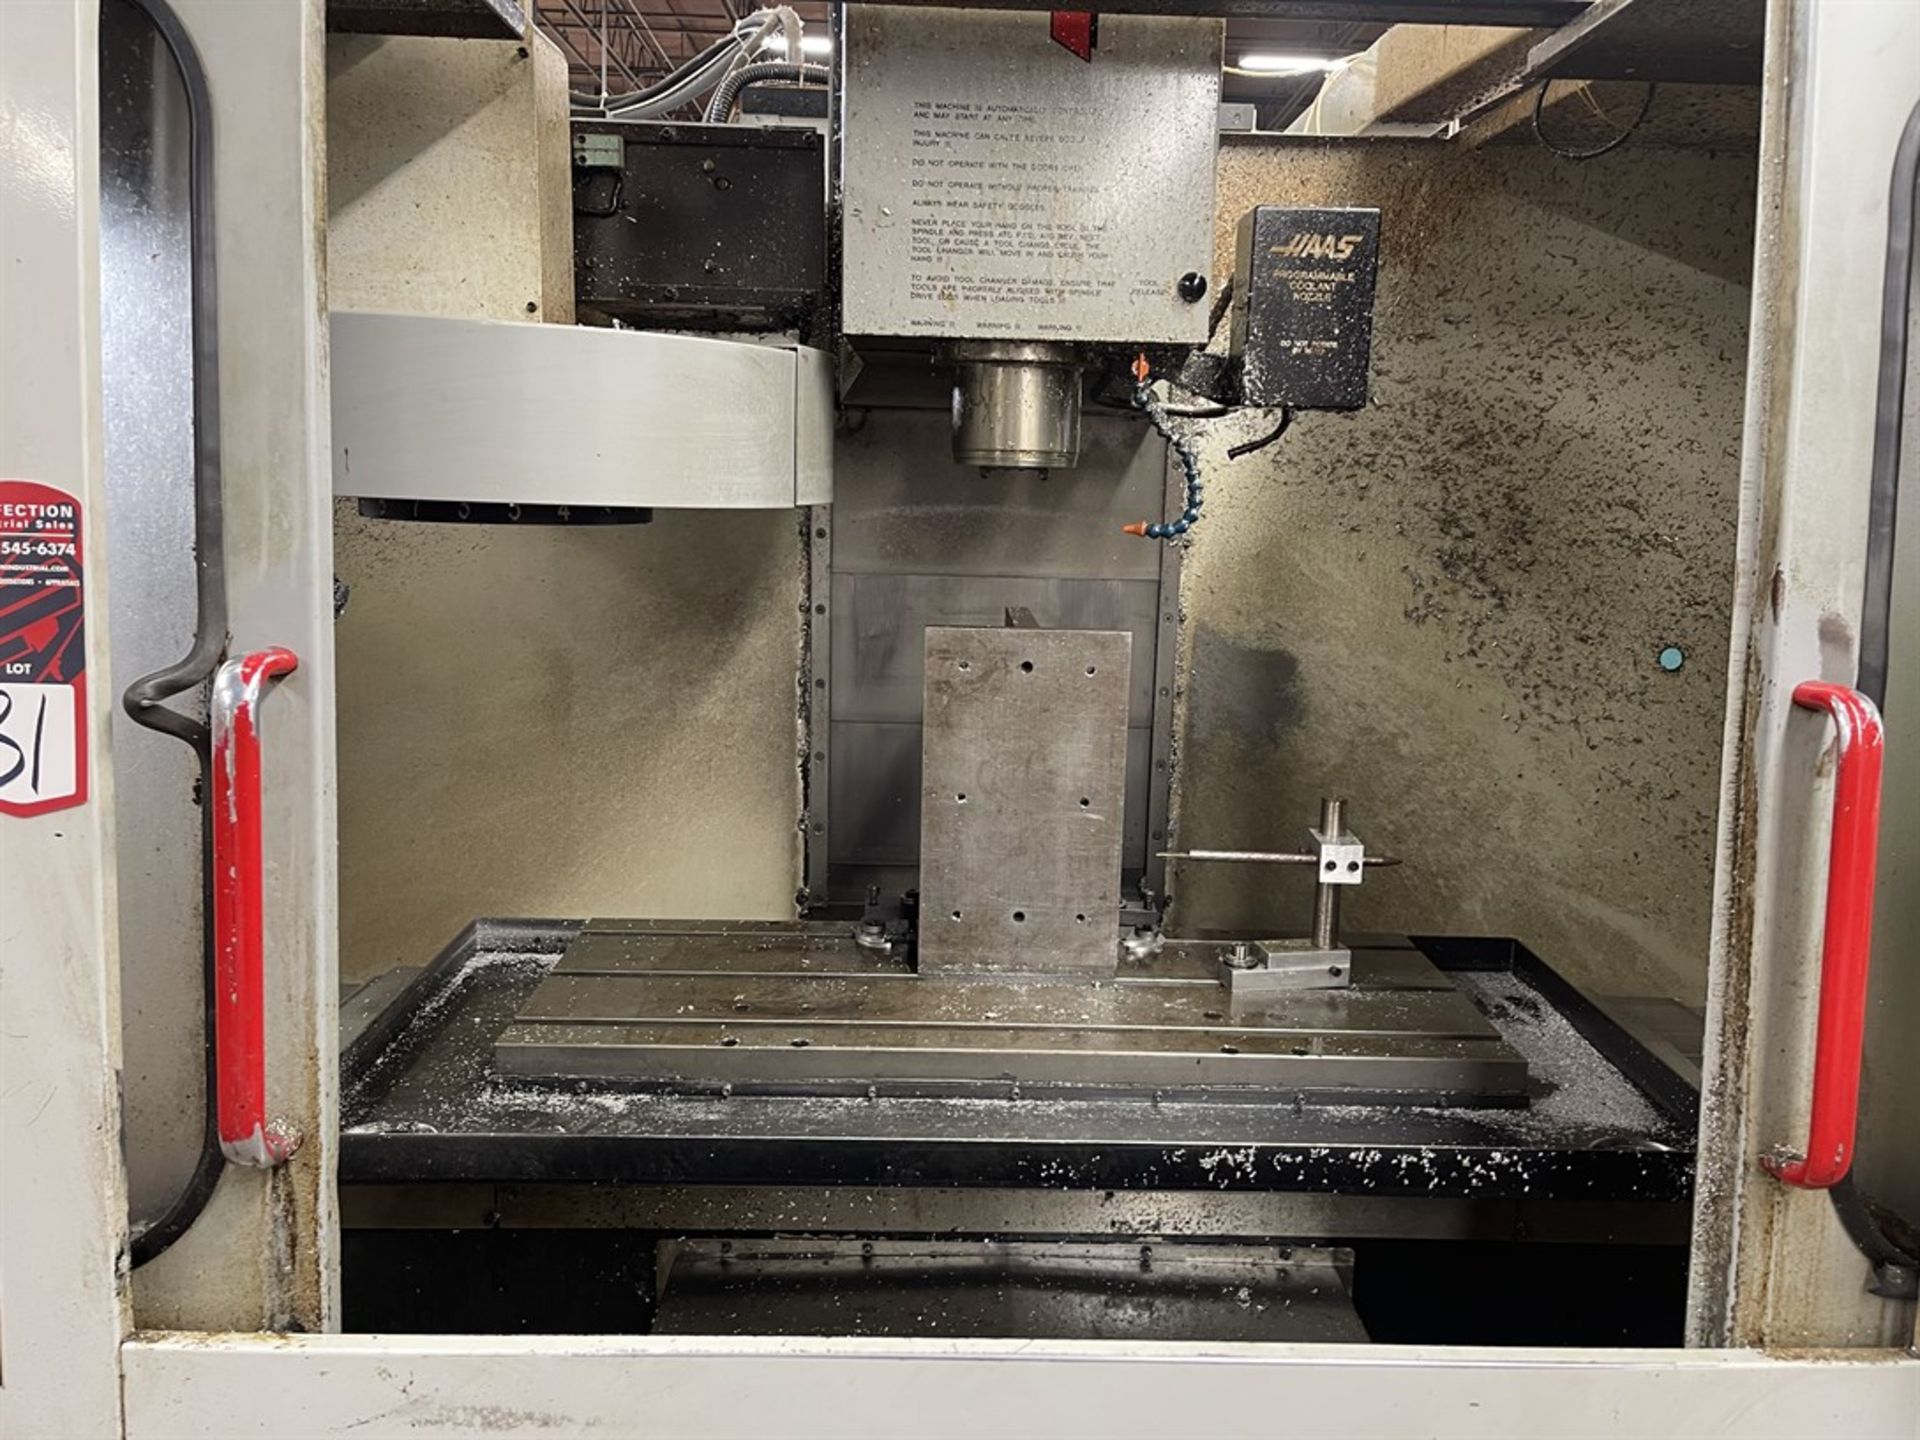 HAAS VF-2 Vertical Machining Center, s/n 8903, Haas Control, 30” X, 16” Y, 20” Z, 14” x 36” - Image 3 of 8